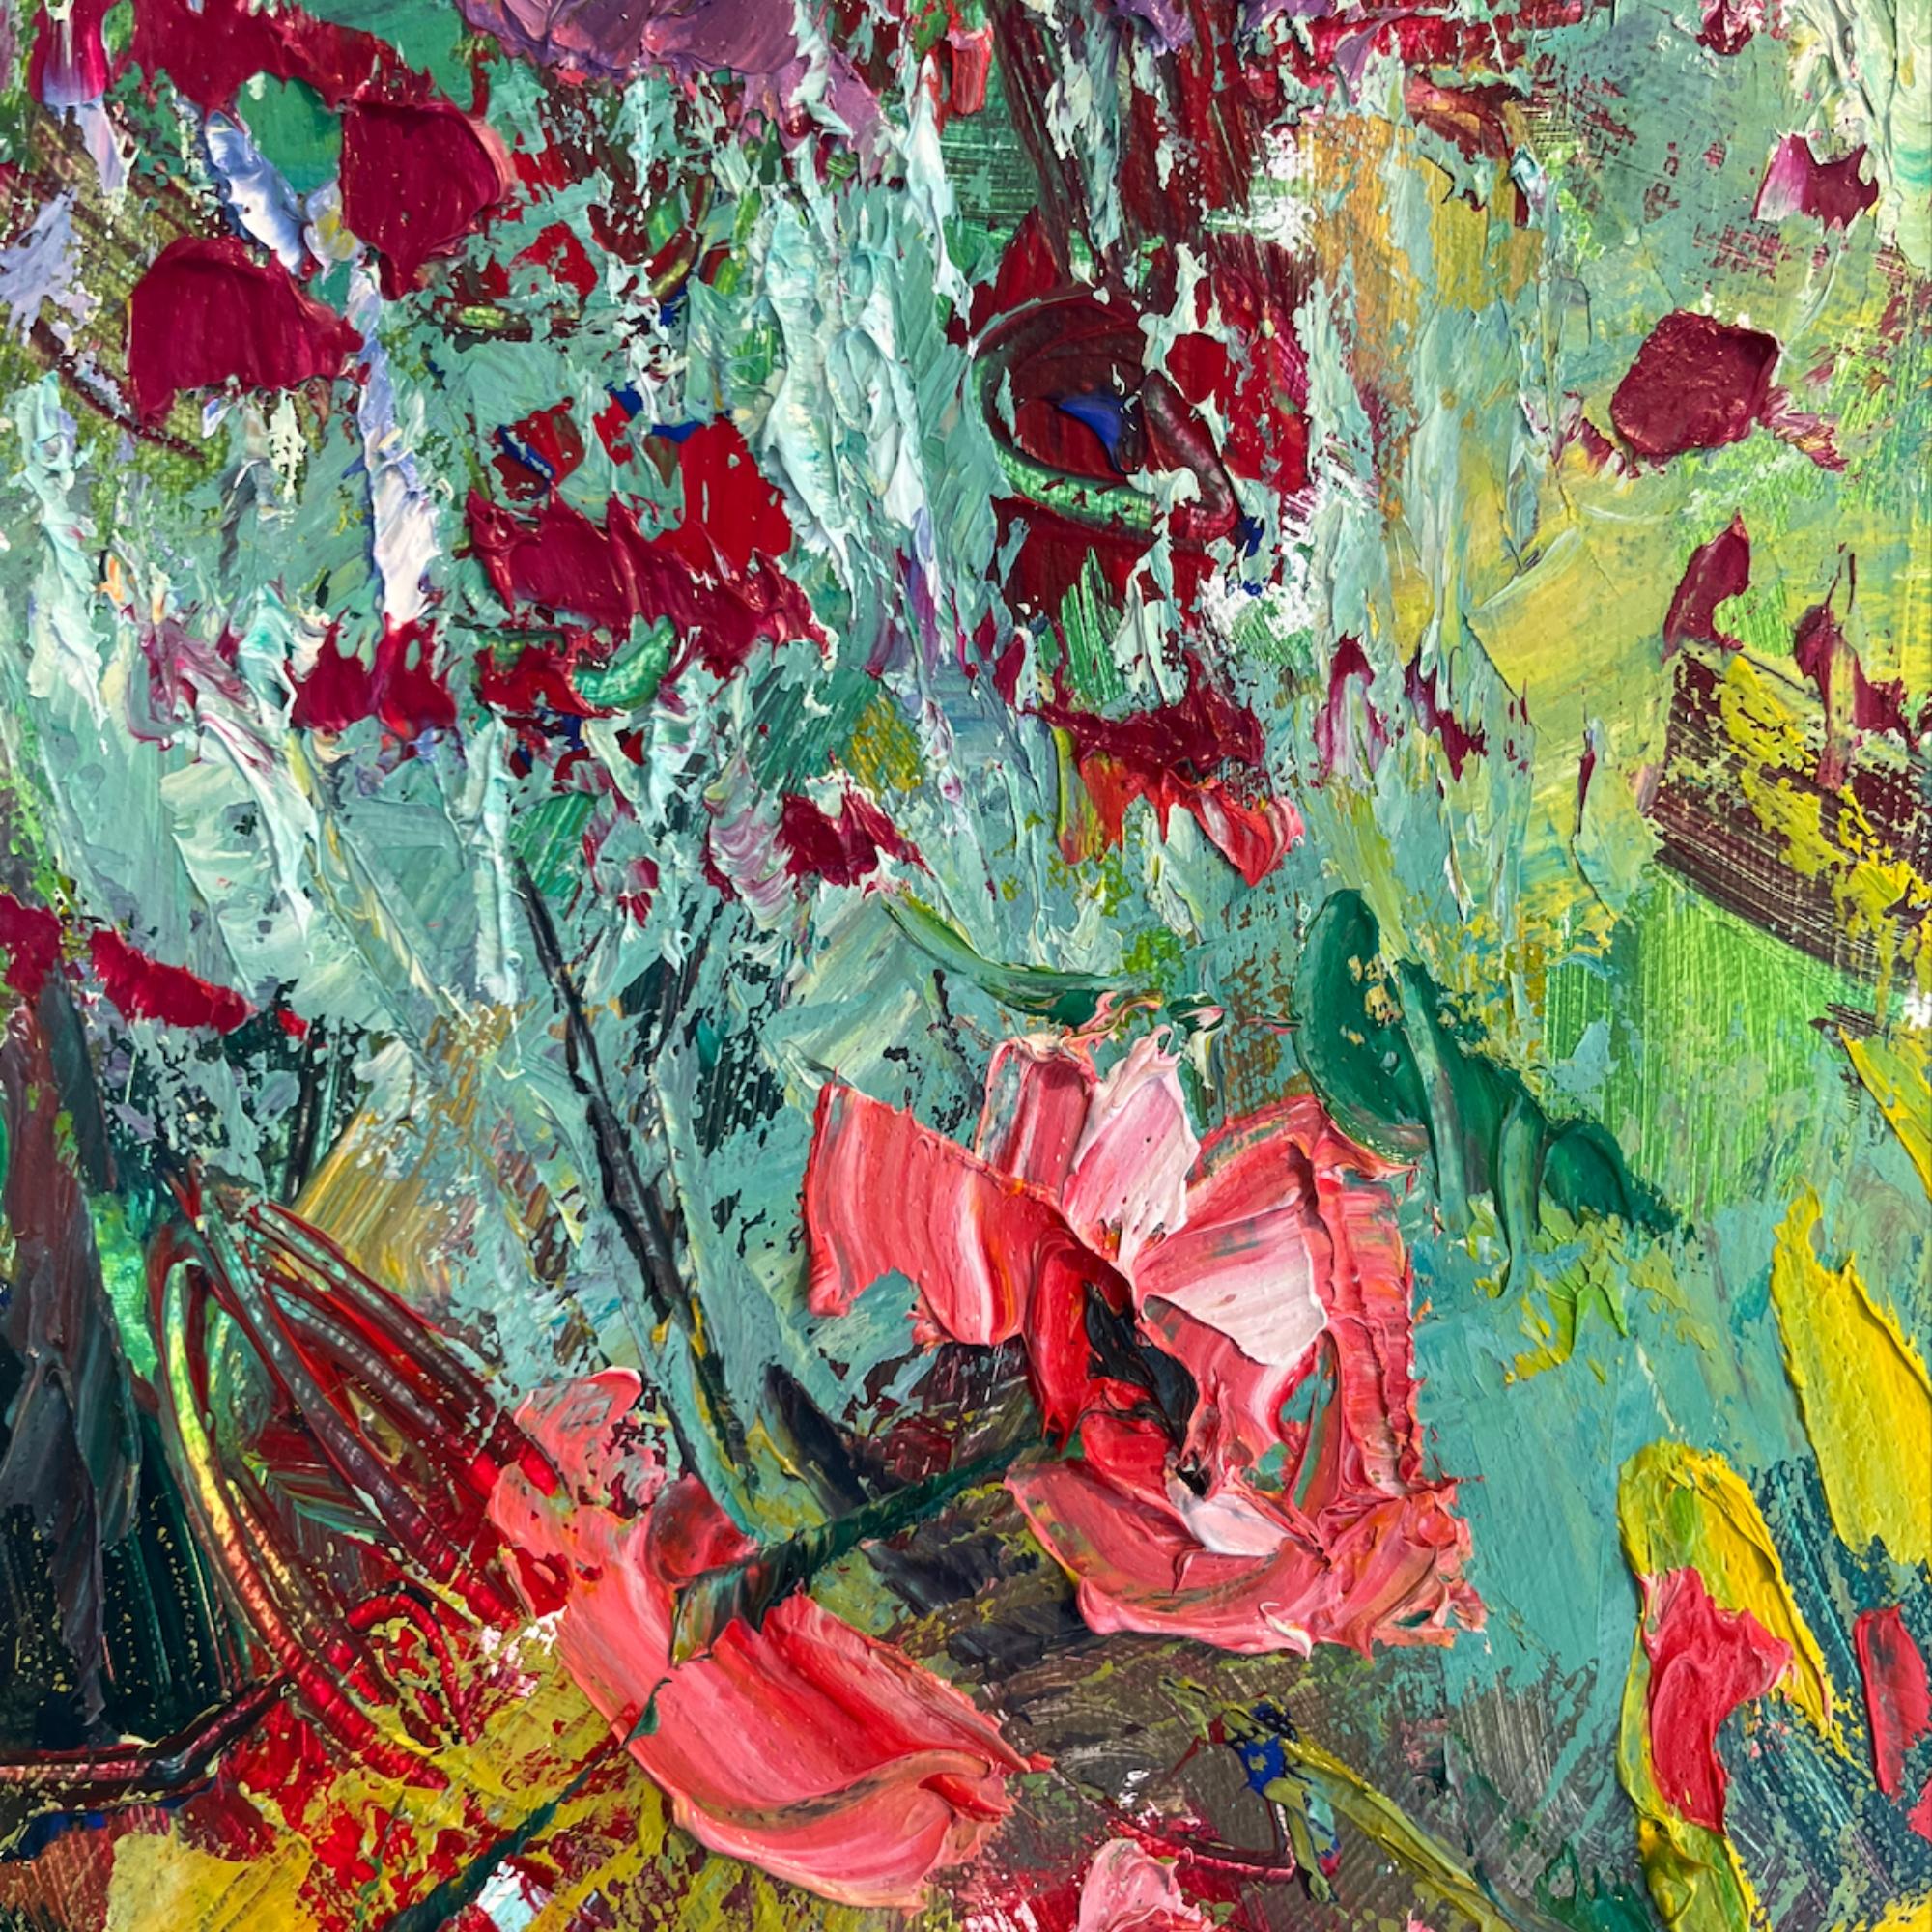 Pink Poppies in the Garden - original abstract still life painting-contemporary - Abstract Impressionist Painting by Sylvia Paul